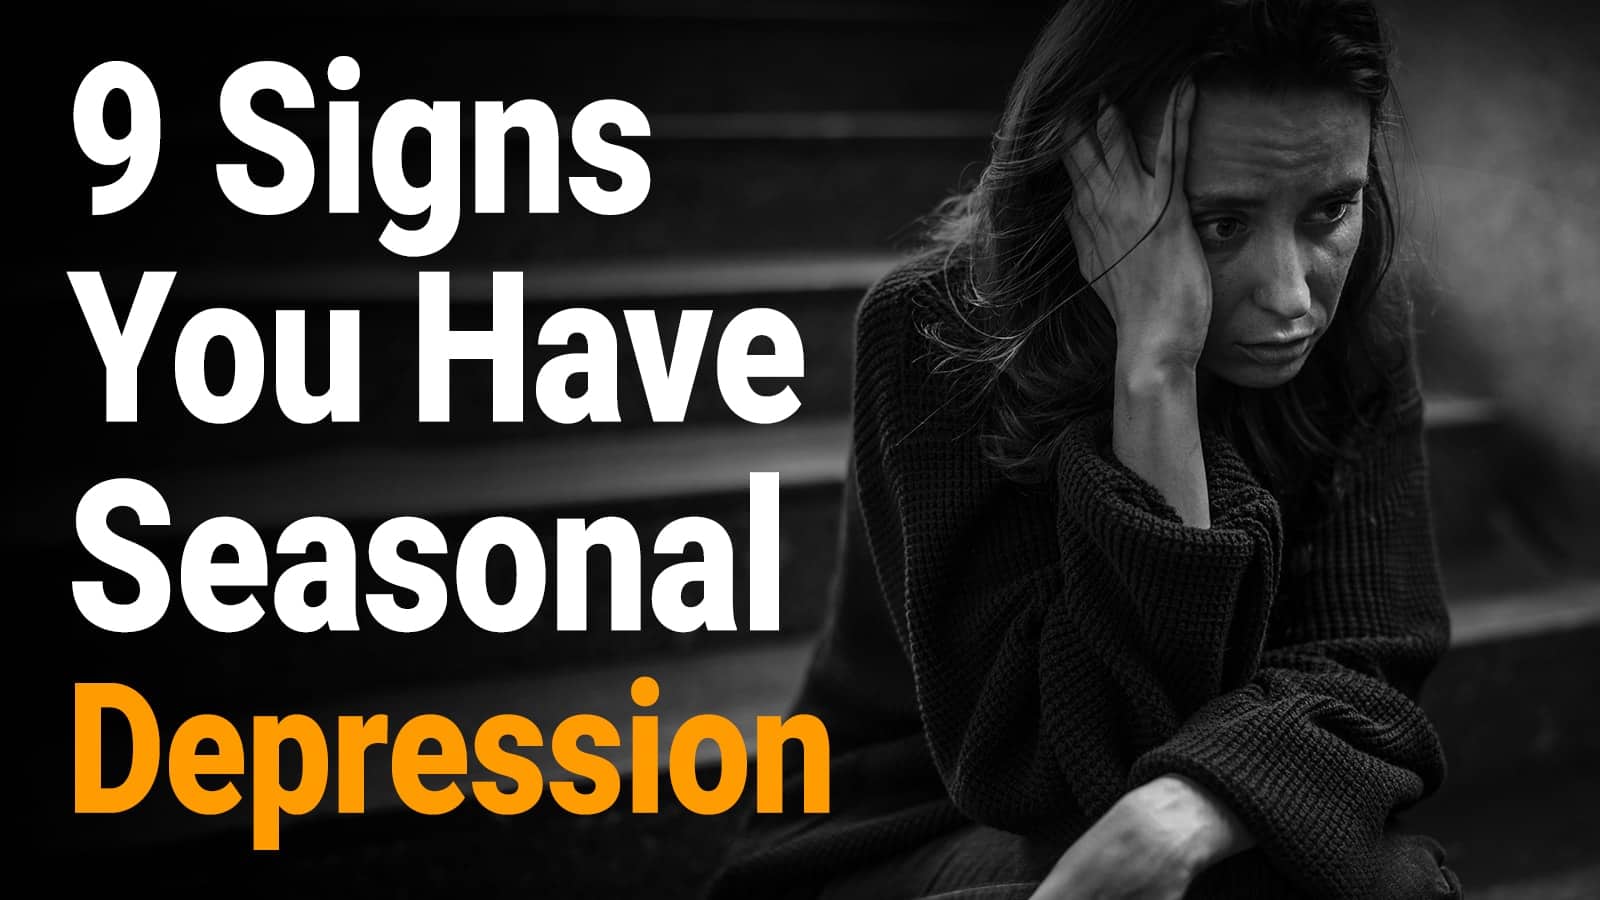 9 Signs You Have Seasonal Depression